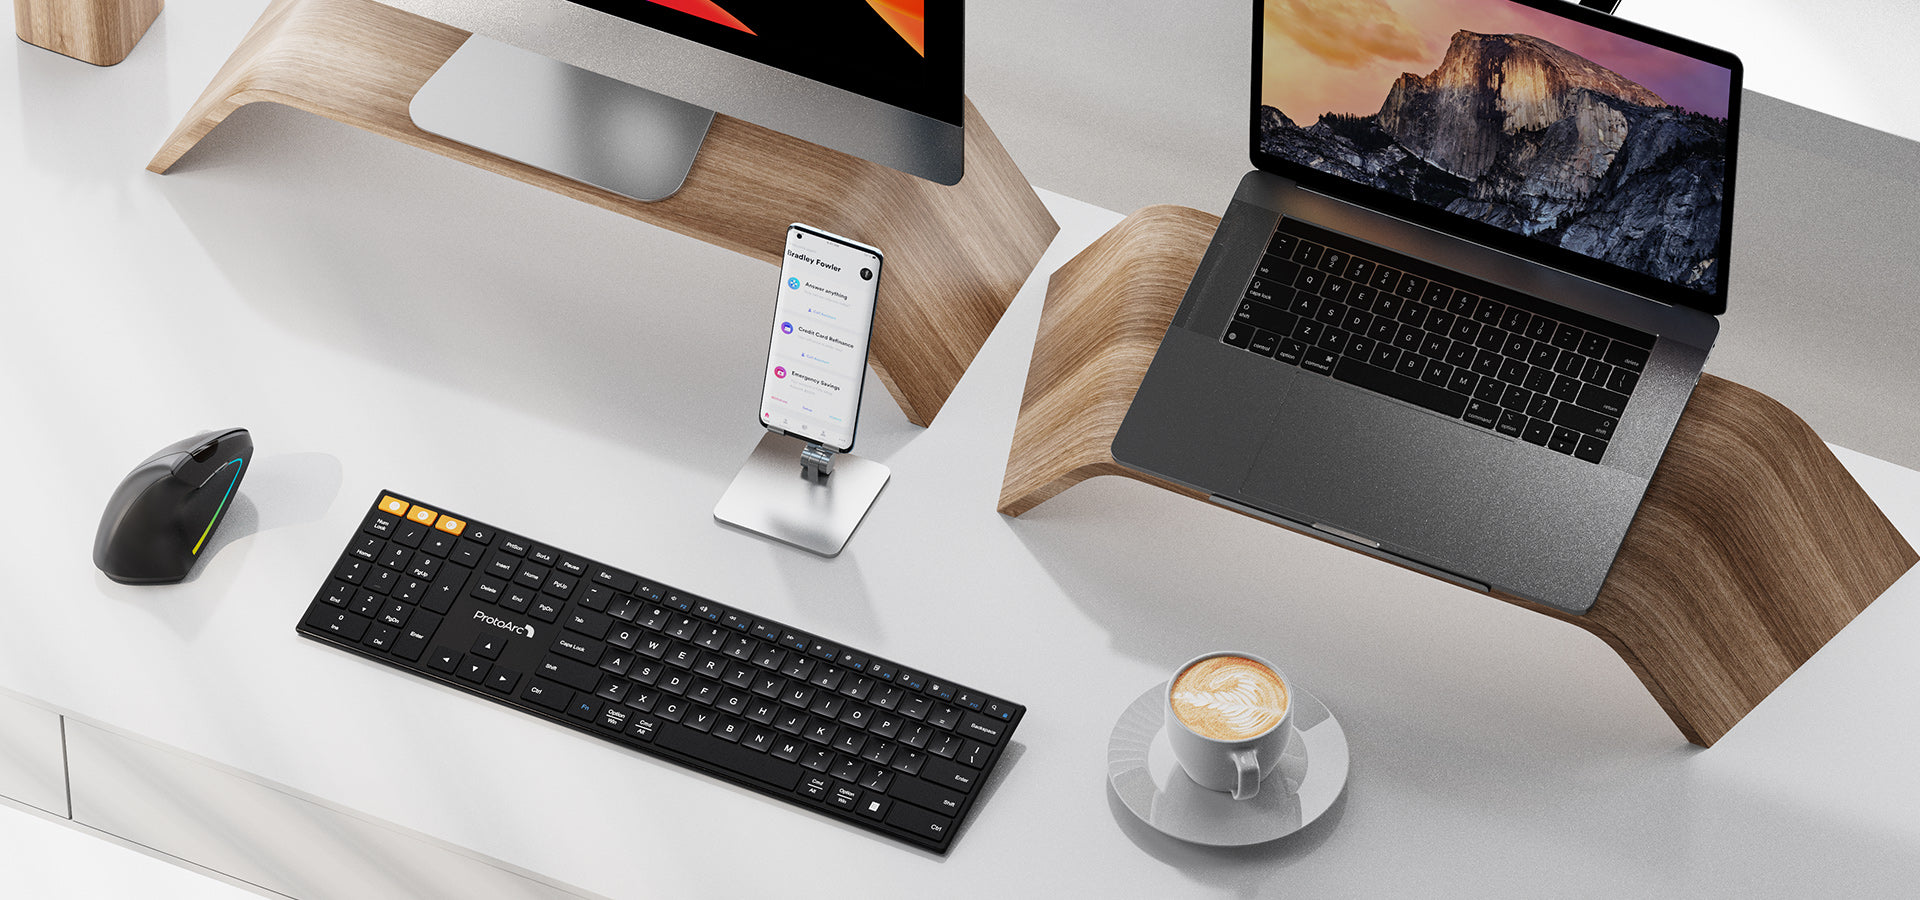 One Keyboard for 3 Devices